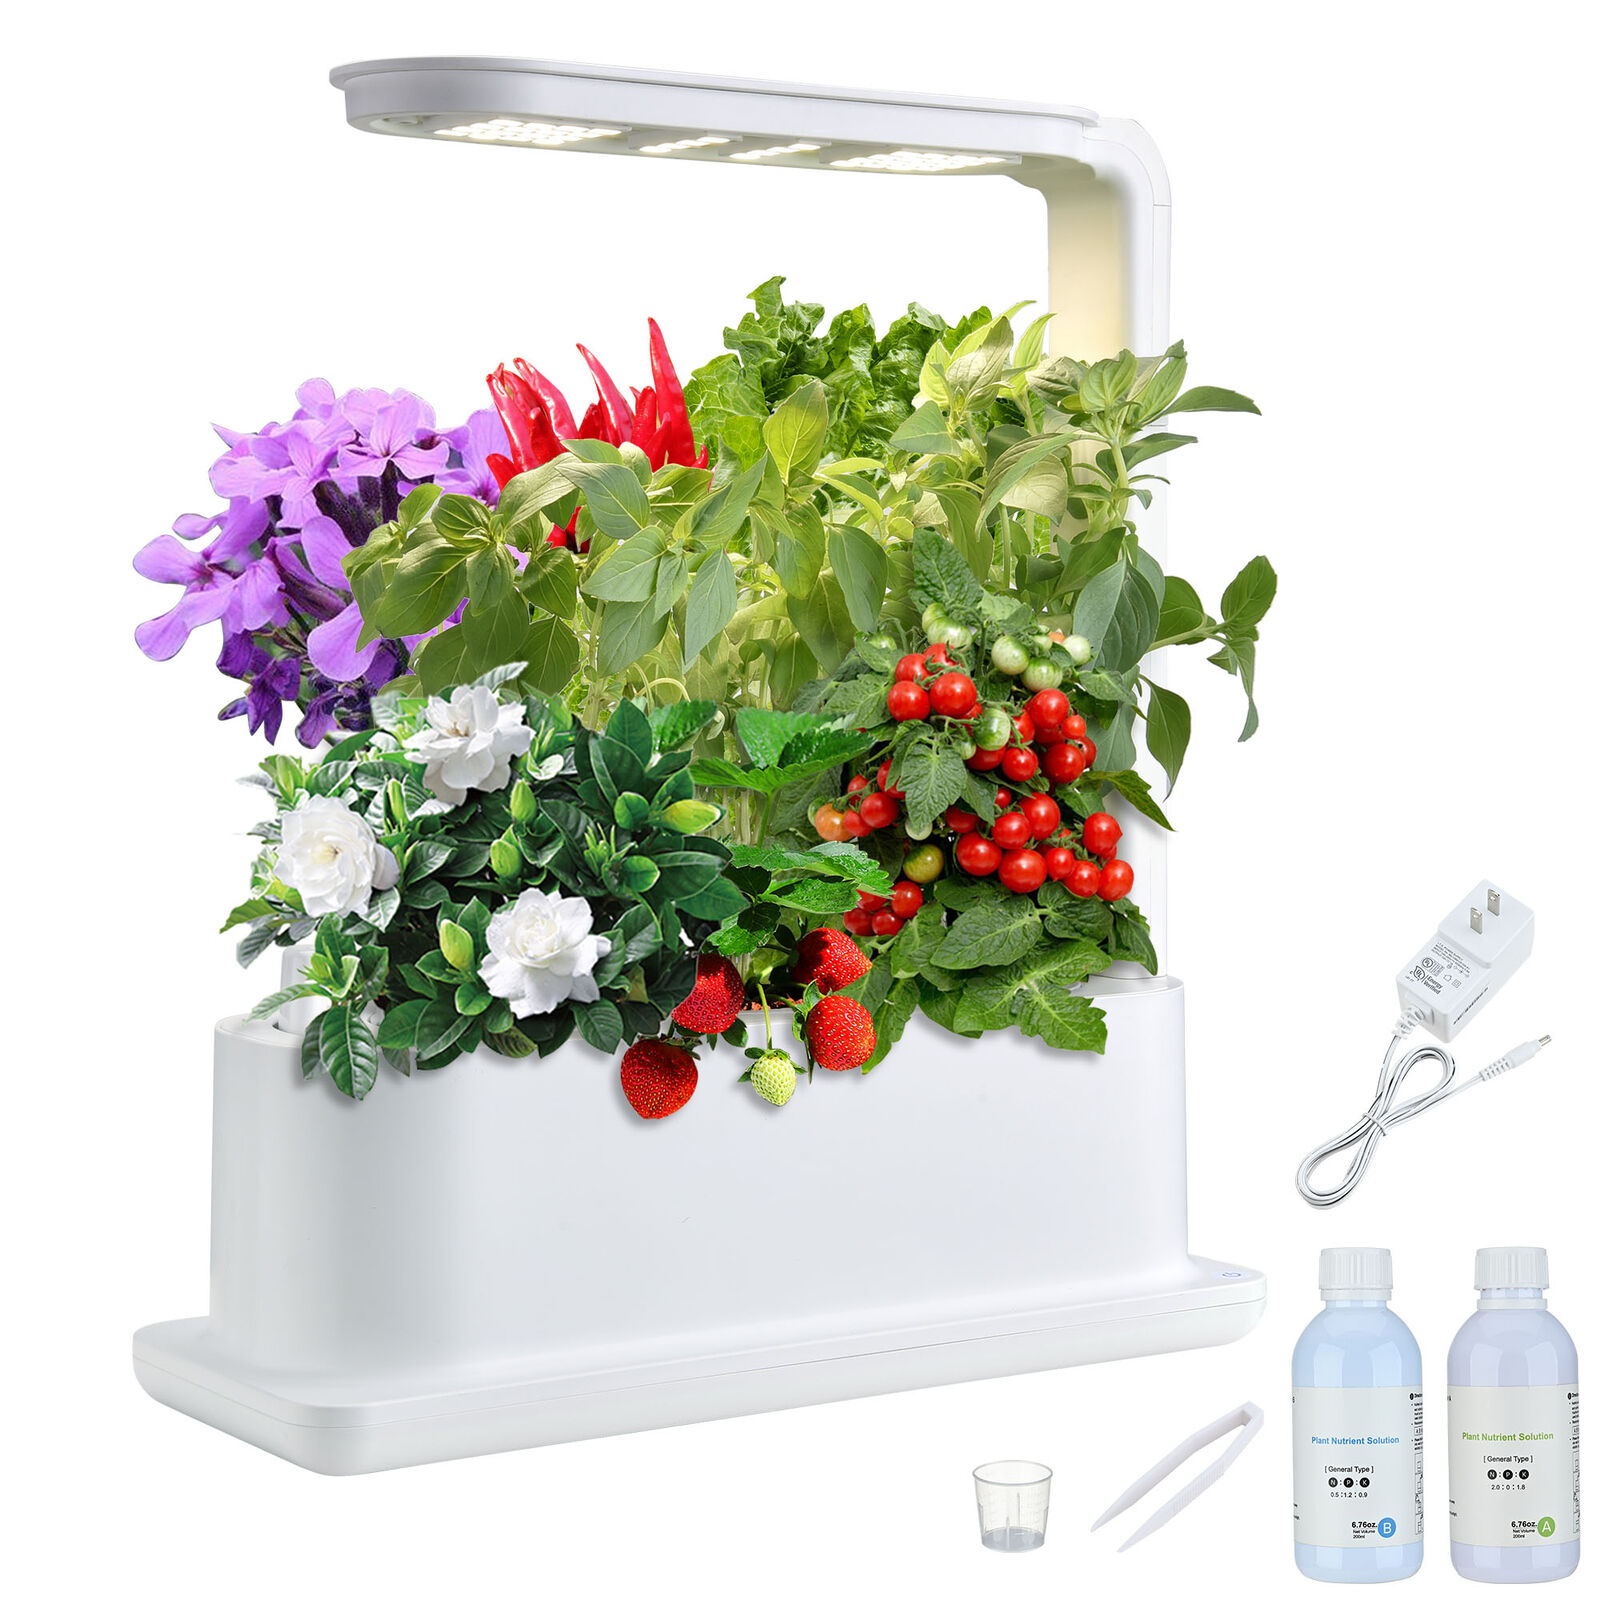 Hydroponic Soil-Free Indoor Growing System Growing System Easy to Operate